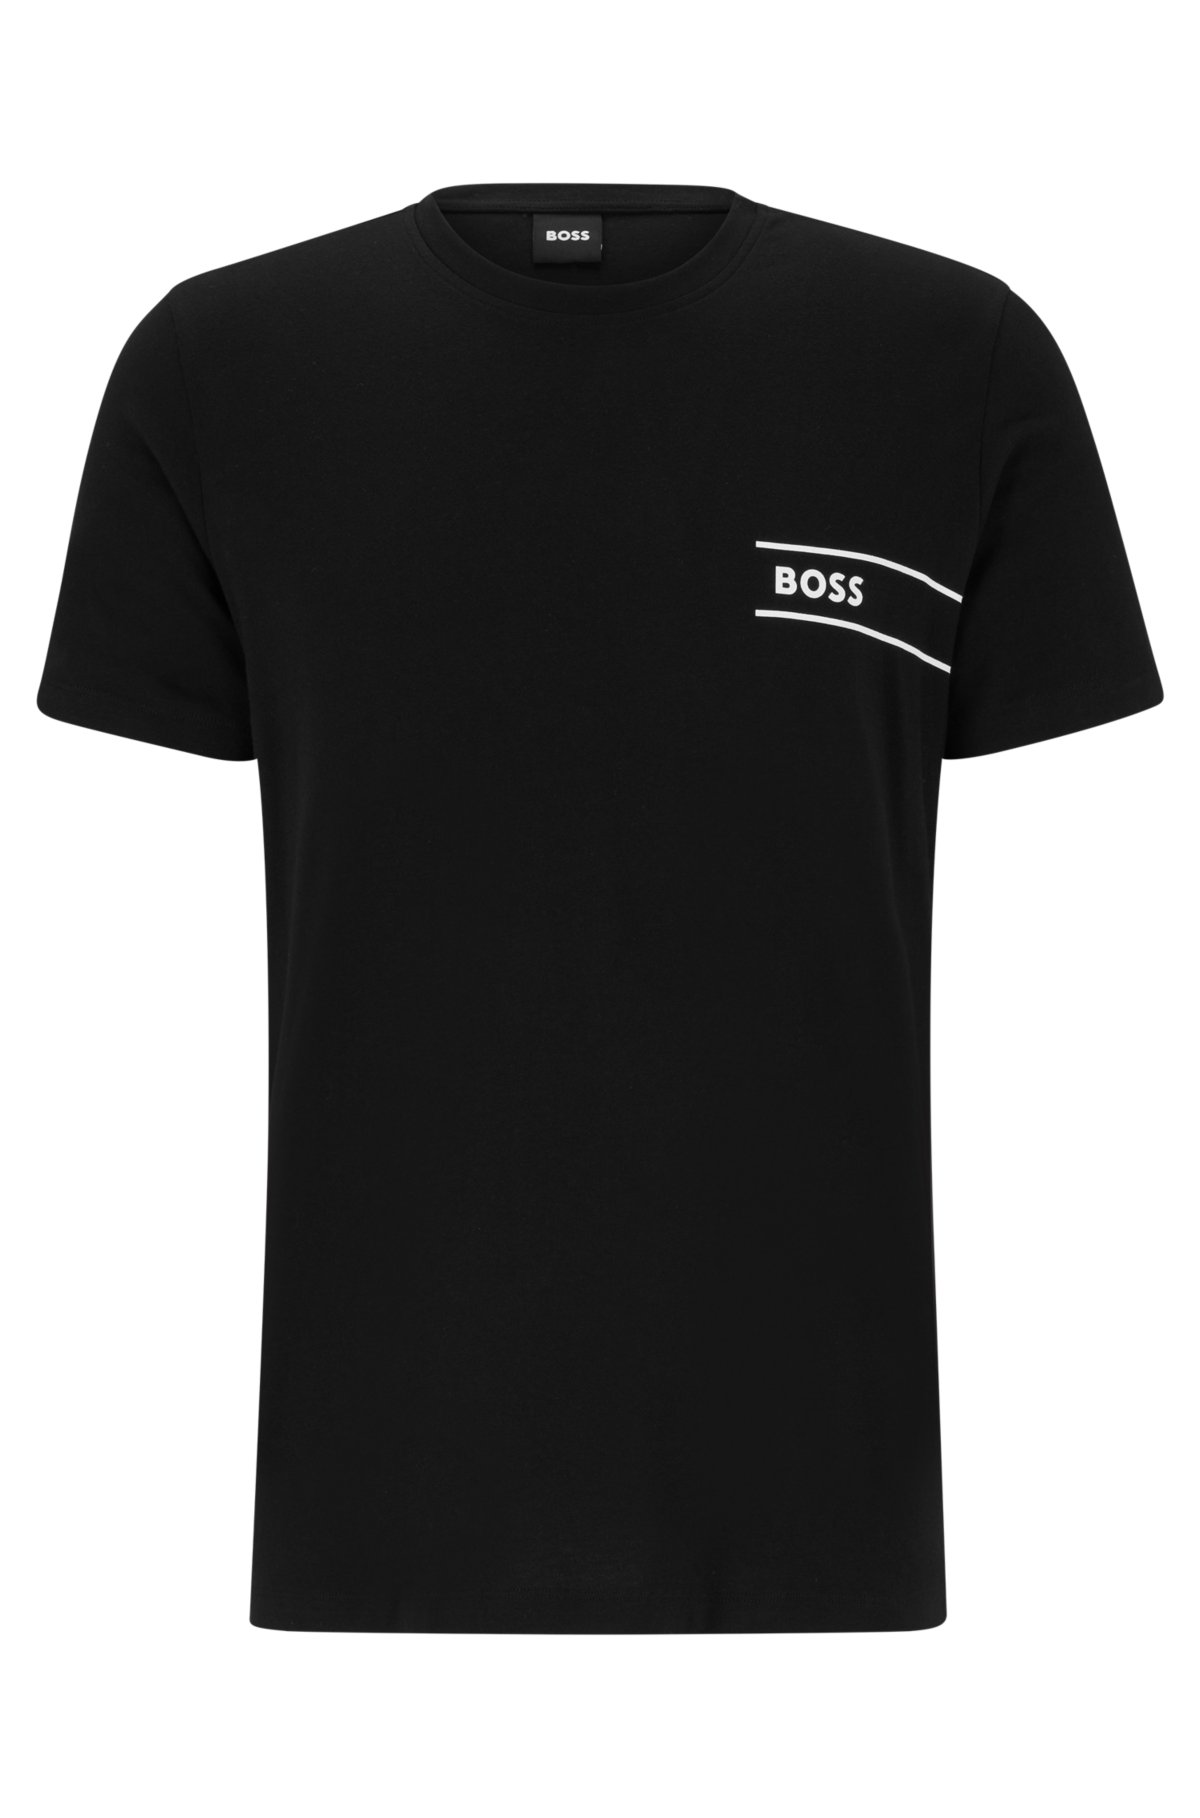 BOSS - Cotton underwear T-shirt with stripes and logo